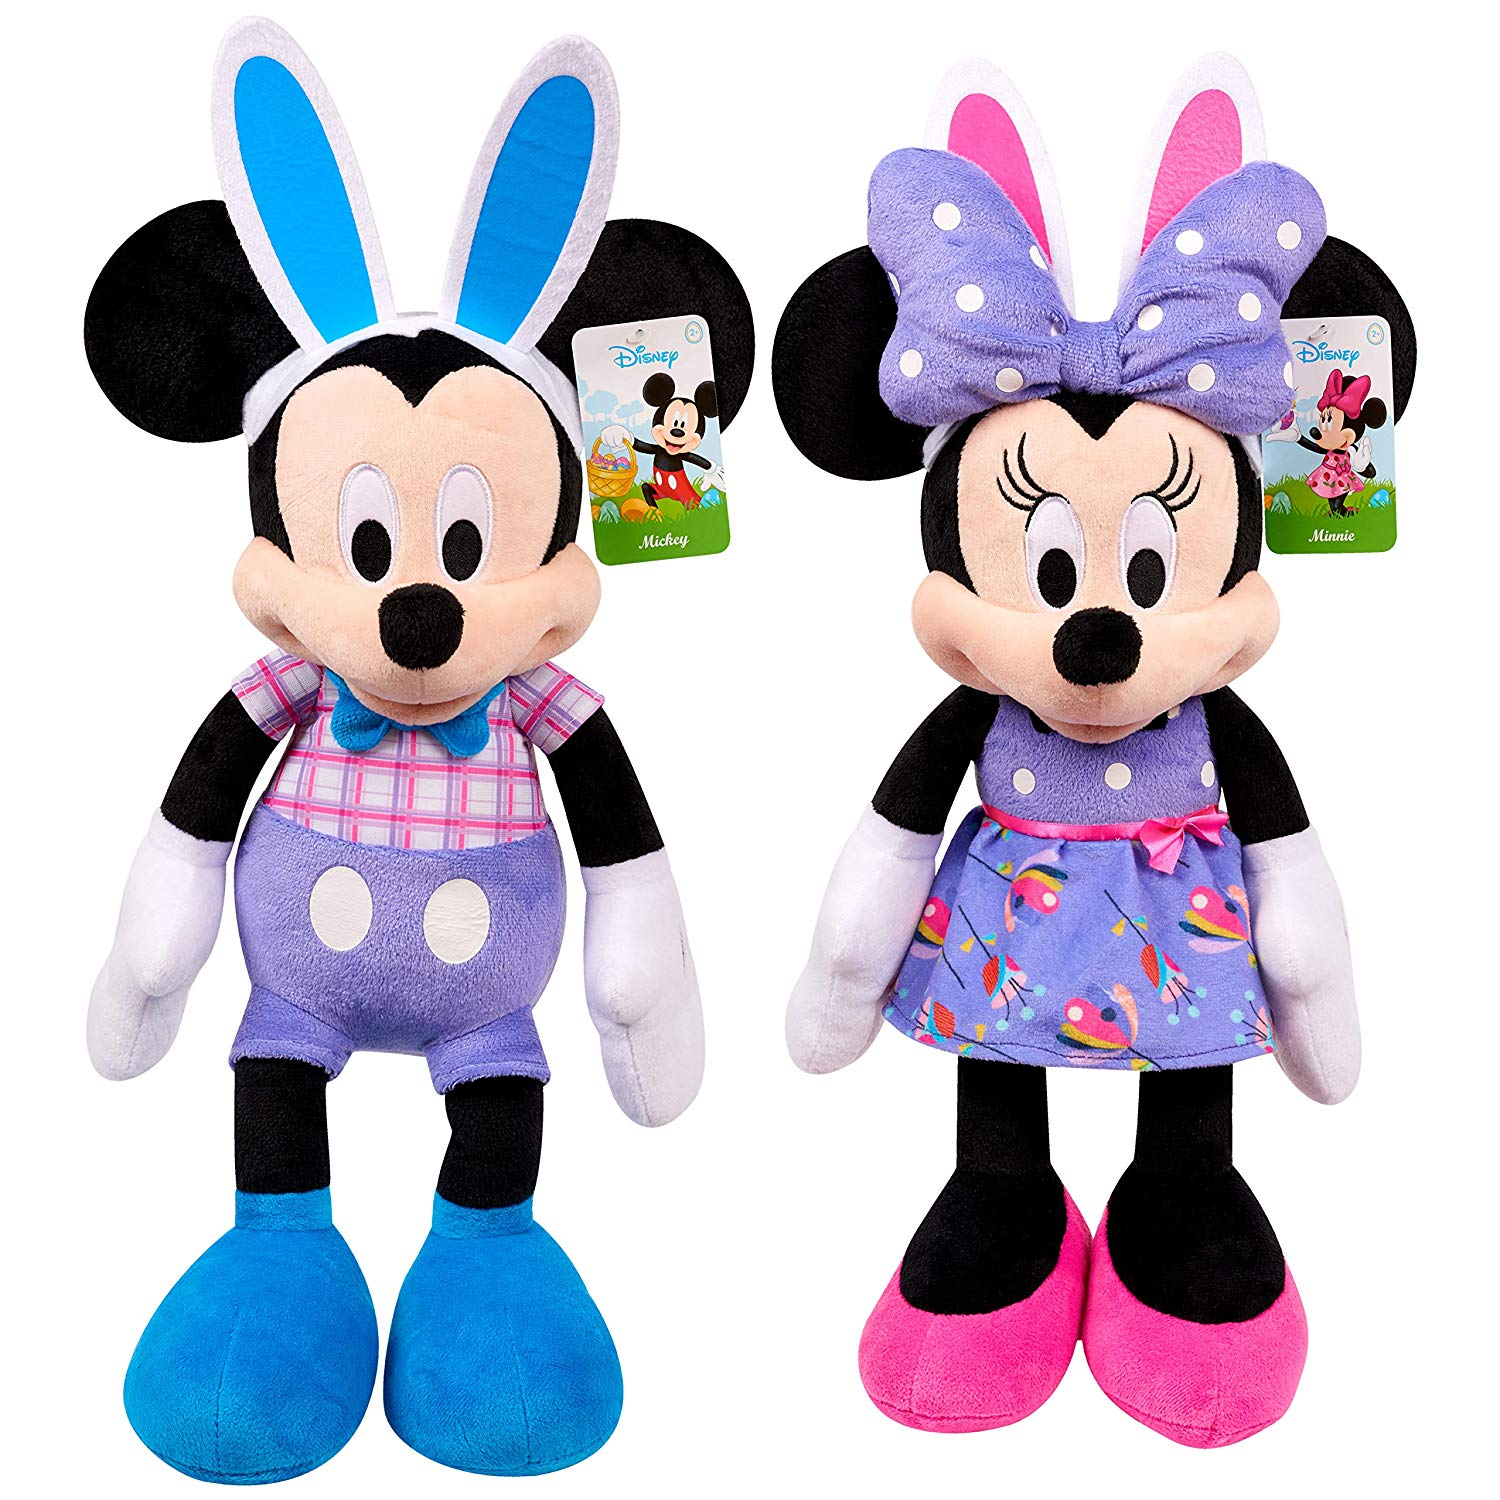 Easter Mickey or Minnie Plush Only $5.00 with $35 Toy Purchase!